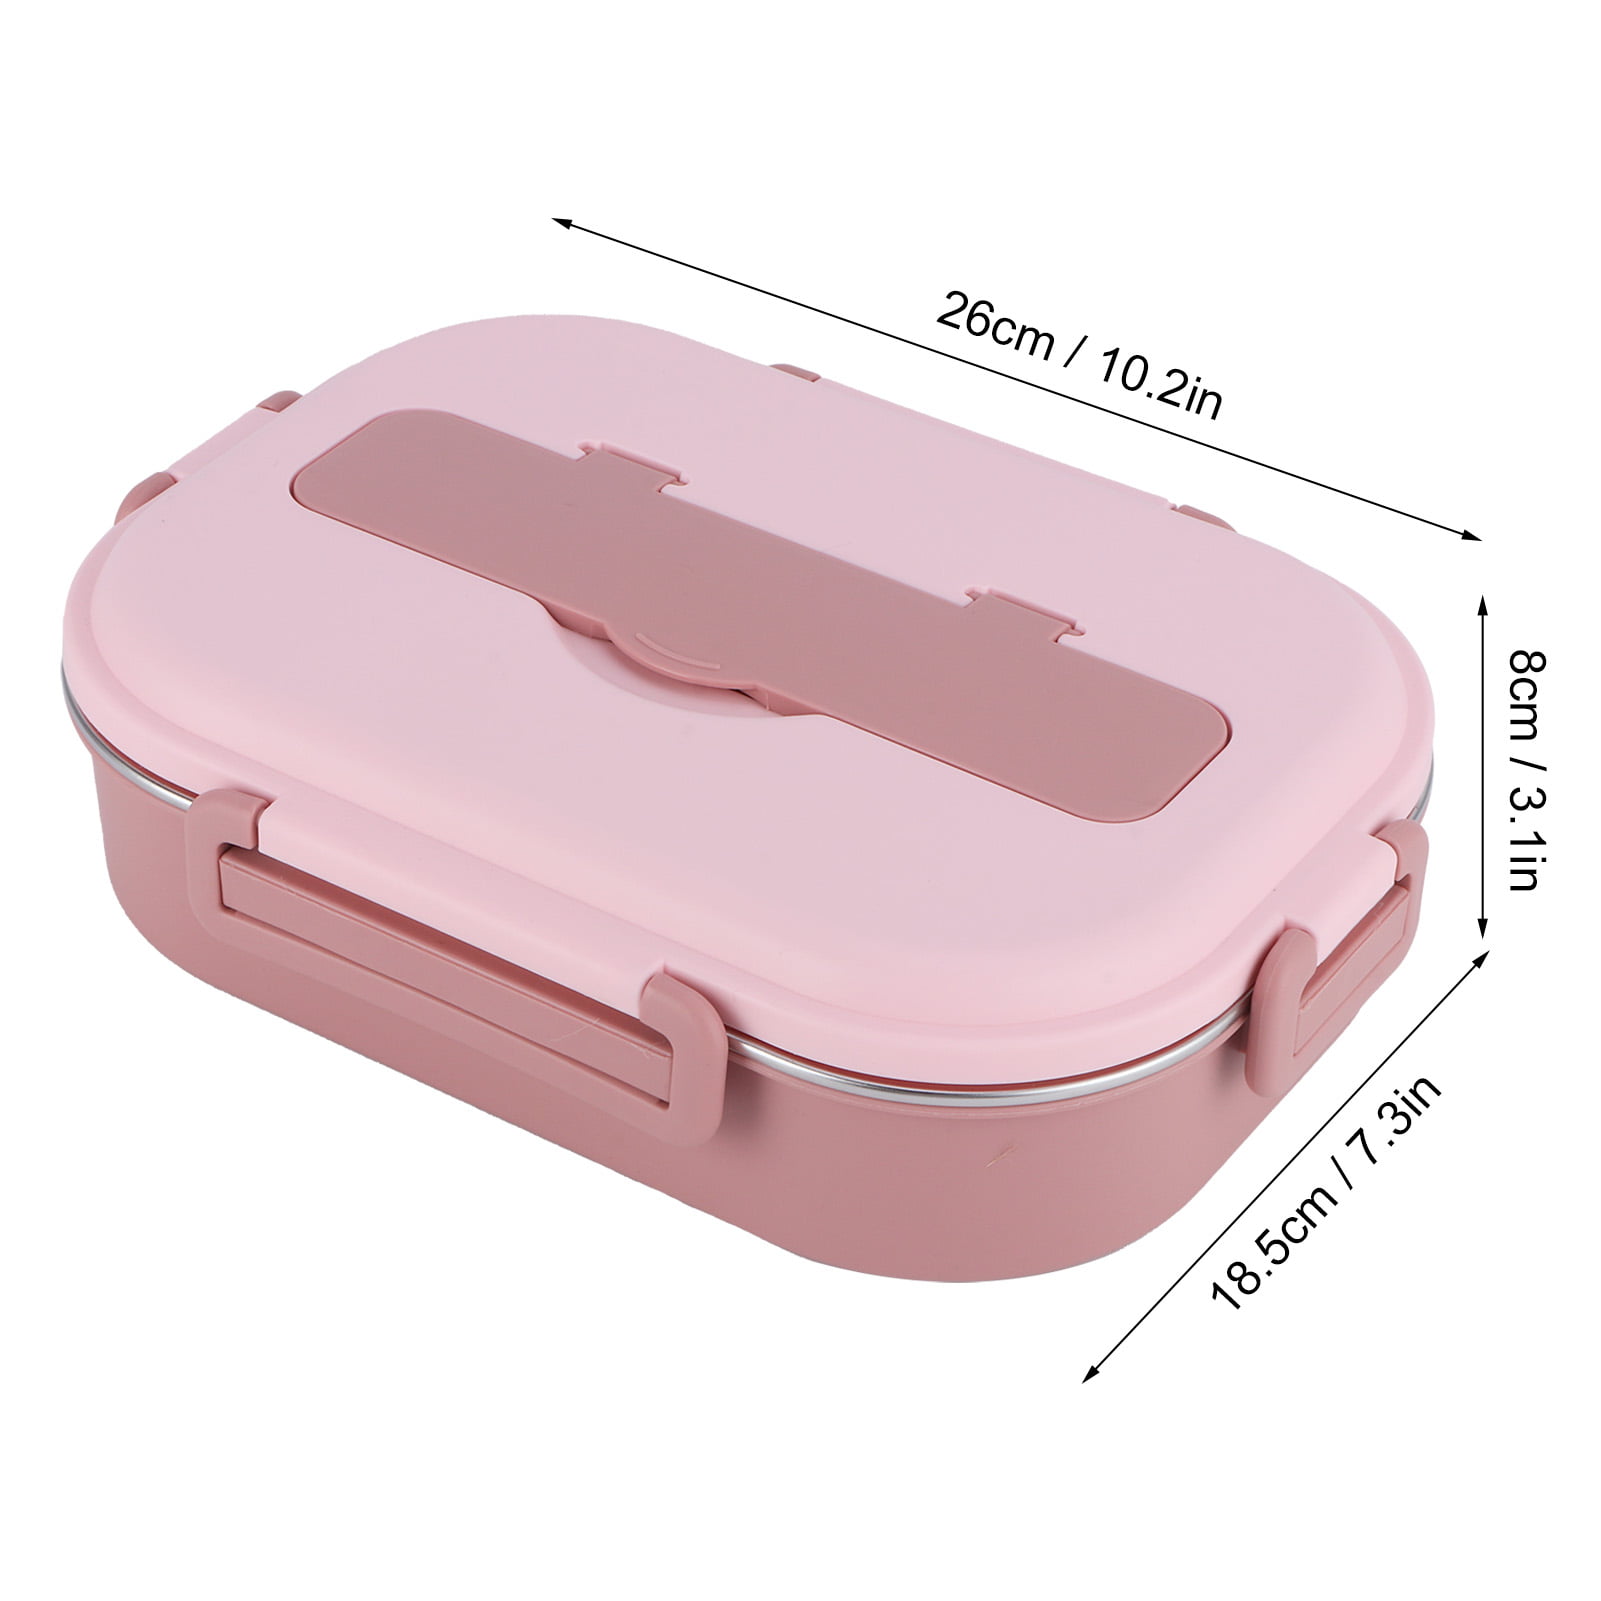 Lunch Box for Kids & Adults - Stainless Steel / ABS – Pink & Blue